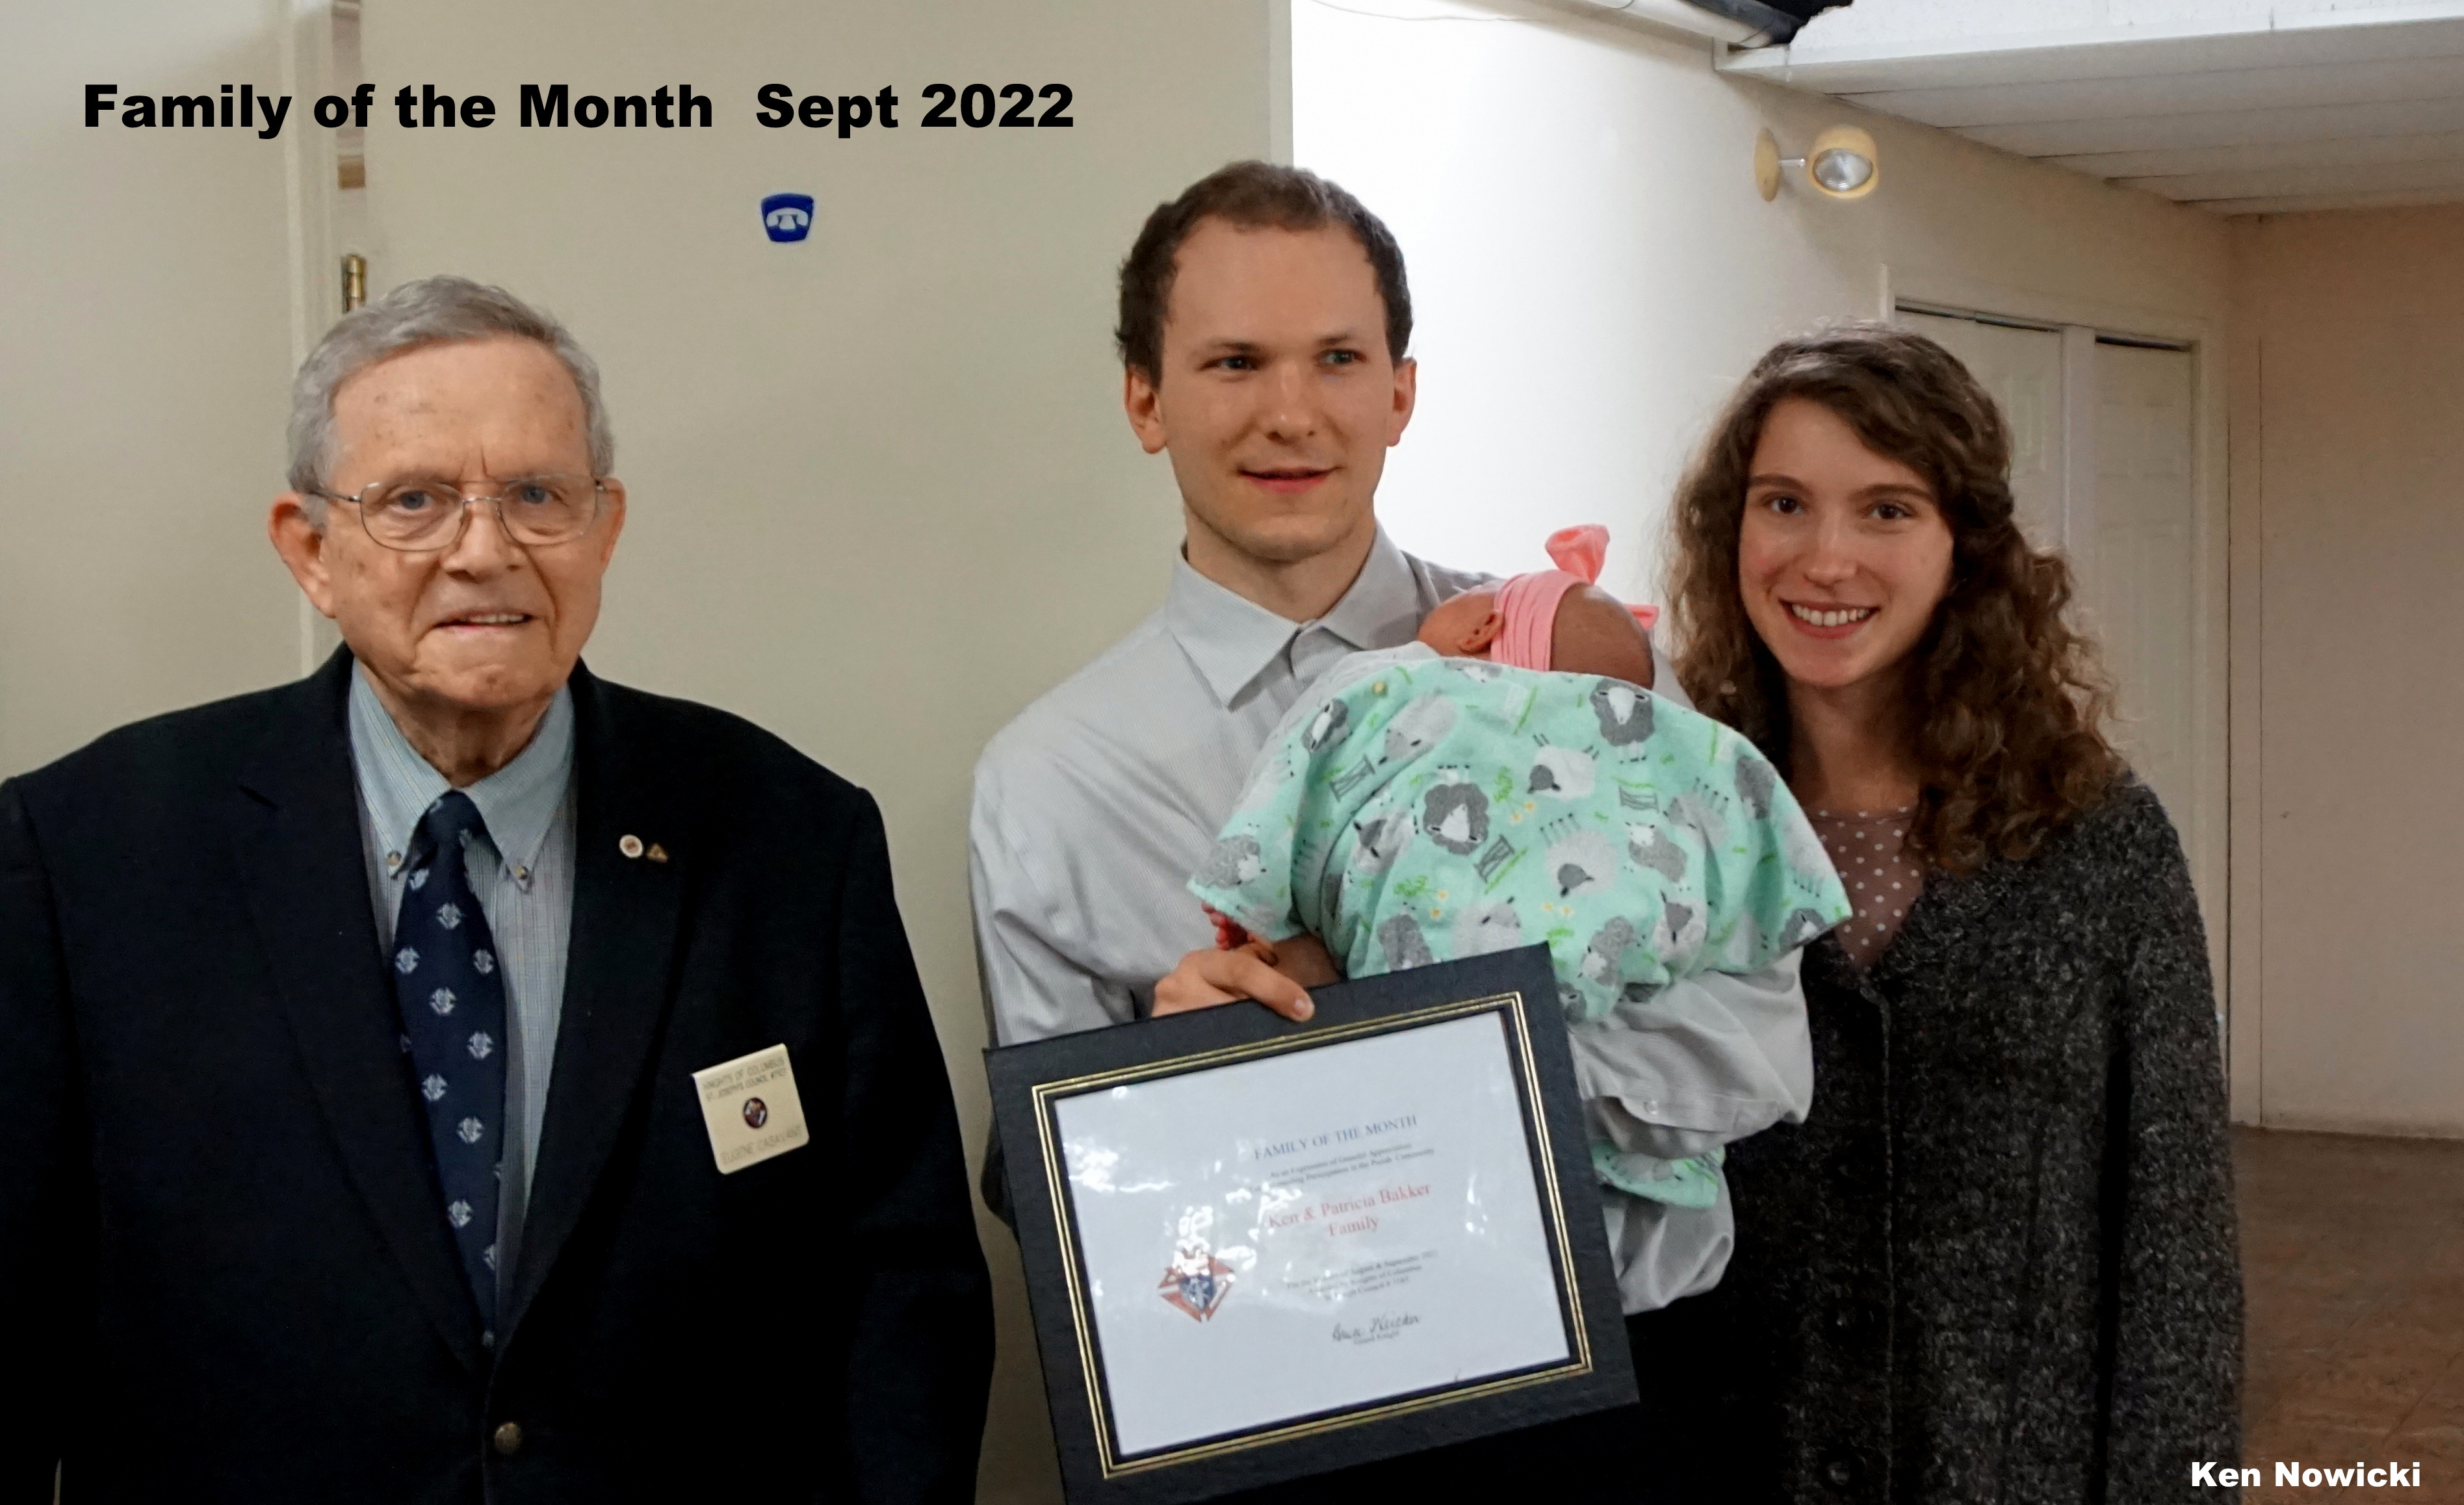 family of the month Sept 2022